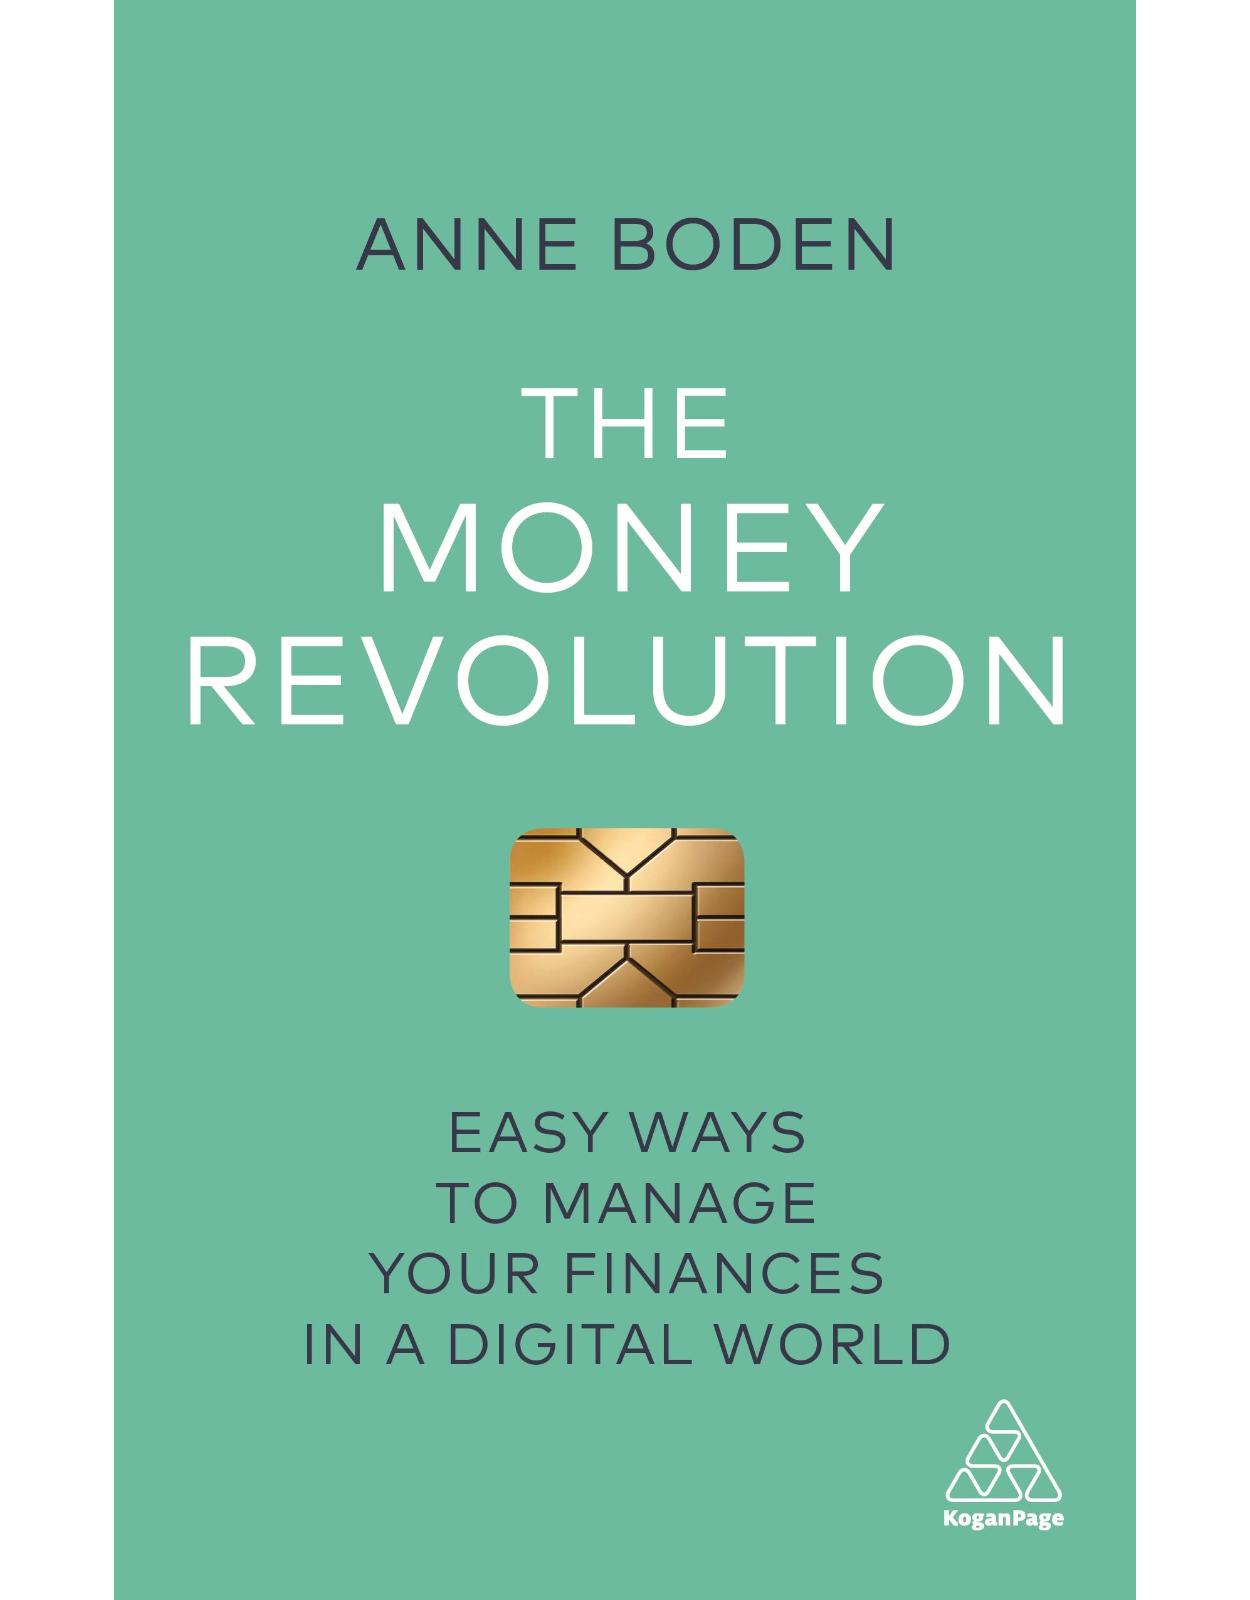 The Money Revolution: Easy Ways to Manage Your Finances in a Digital World